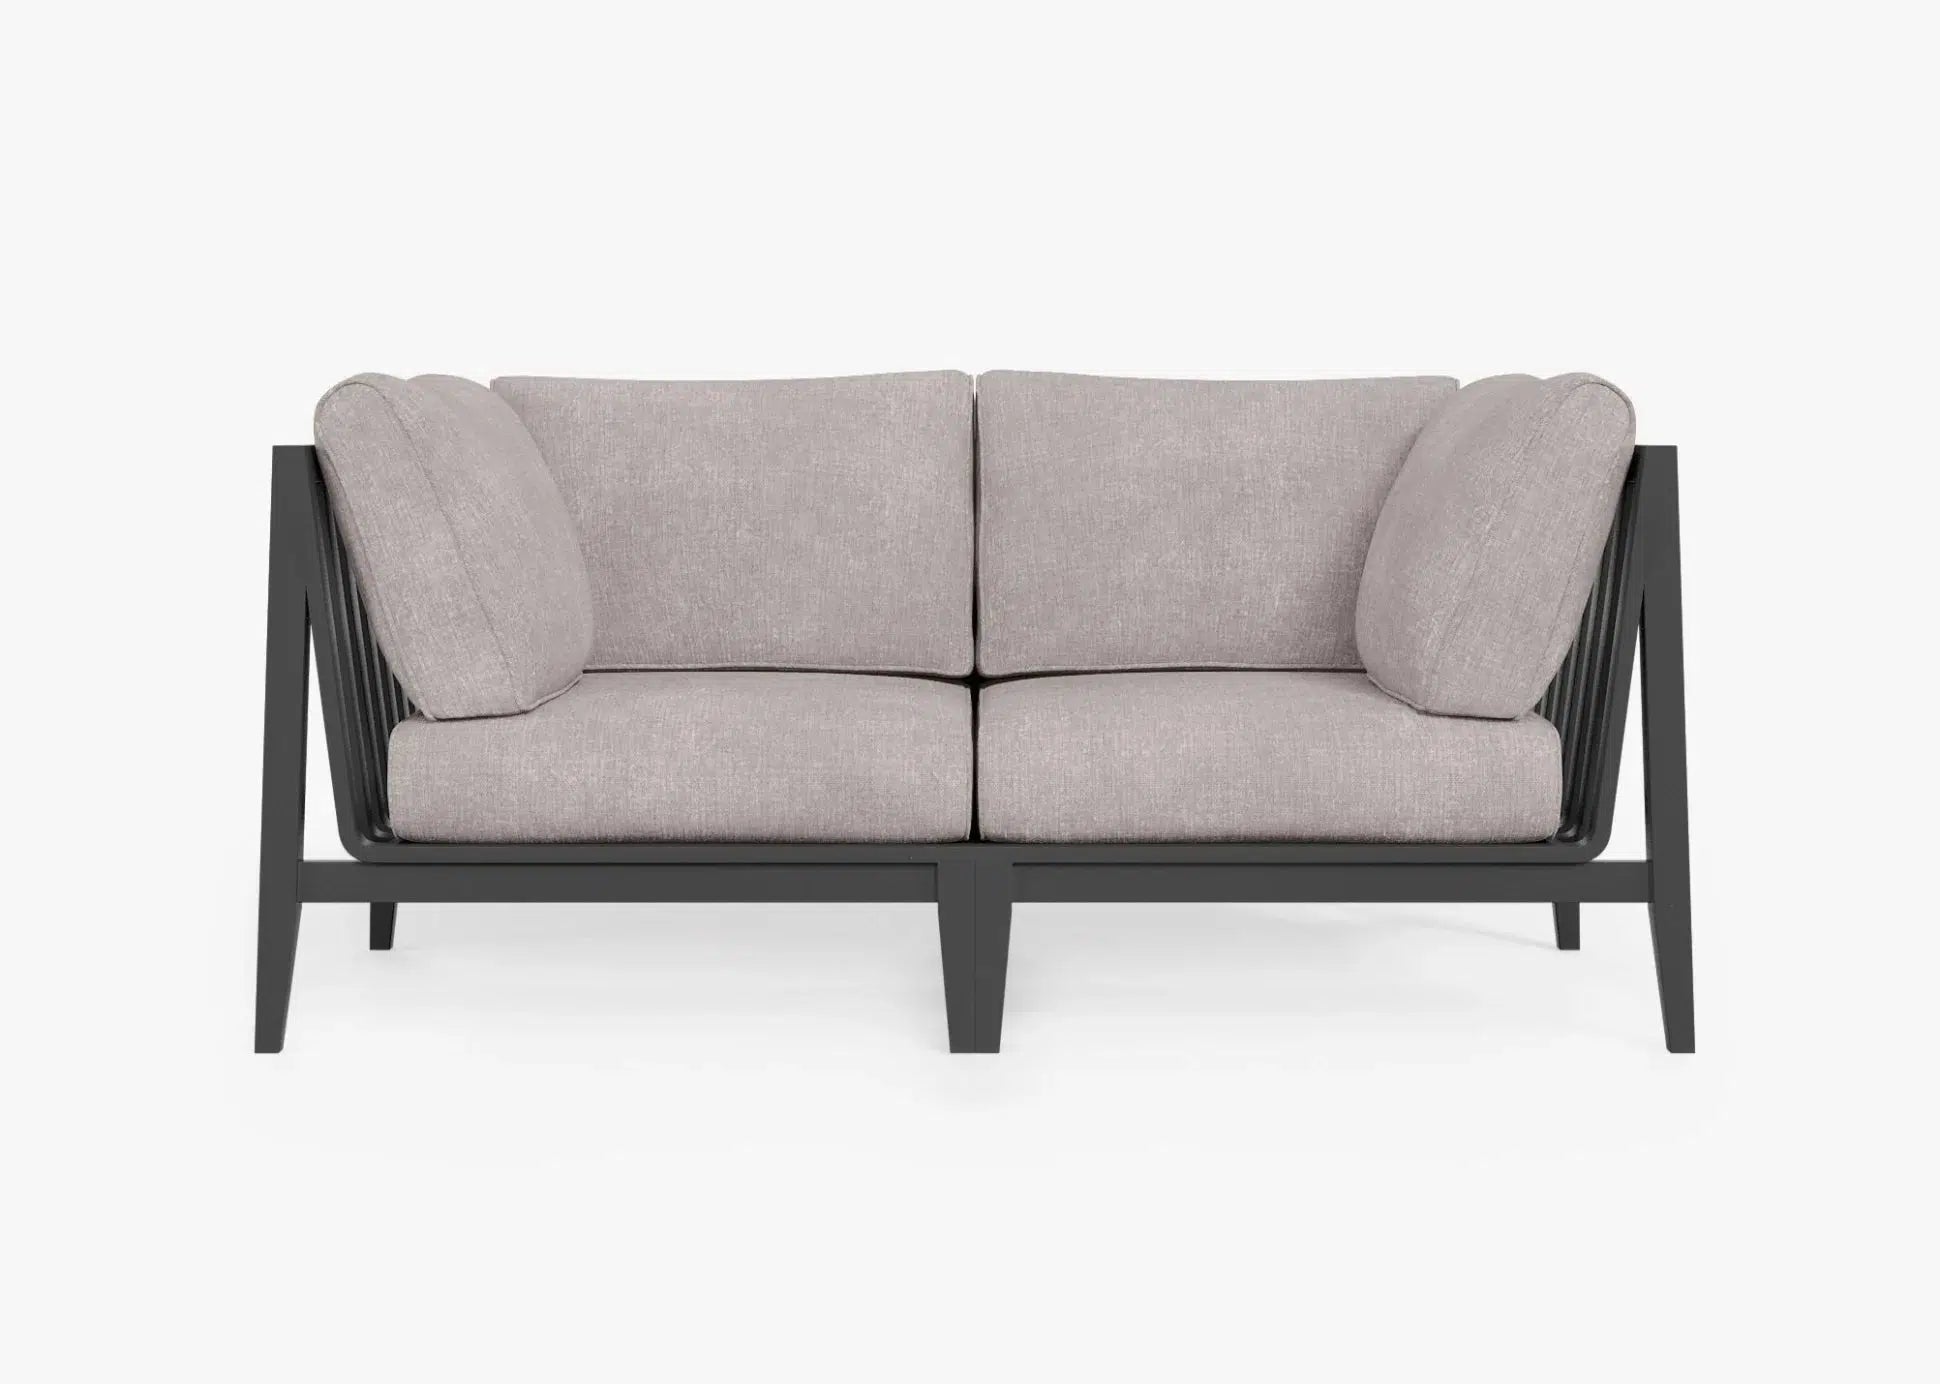 Live Outer 69" Charcoal Aluminum Outdoor Loveseat With Sandstone Gray Cushion